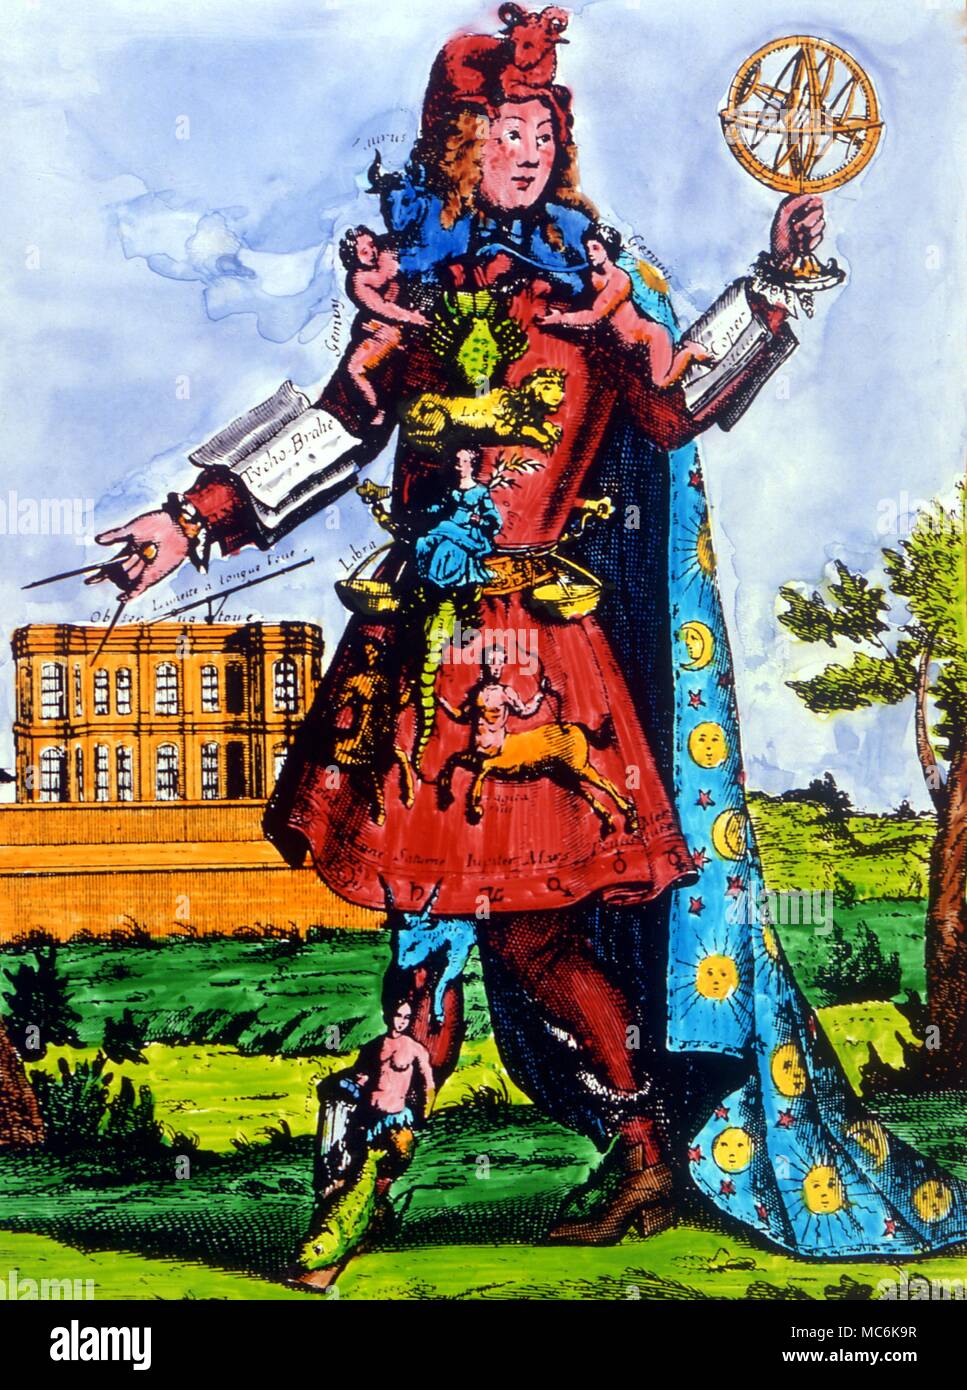 Zodiac Man -18th Century. Hand coloured engraving of the melothesic figure. French 18thc. Stock Photo